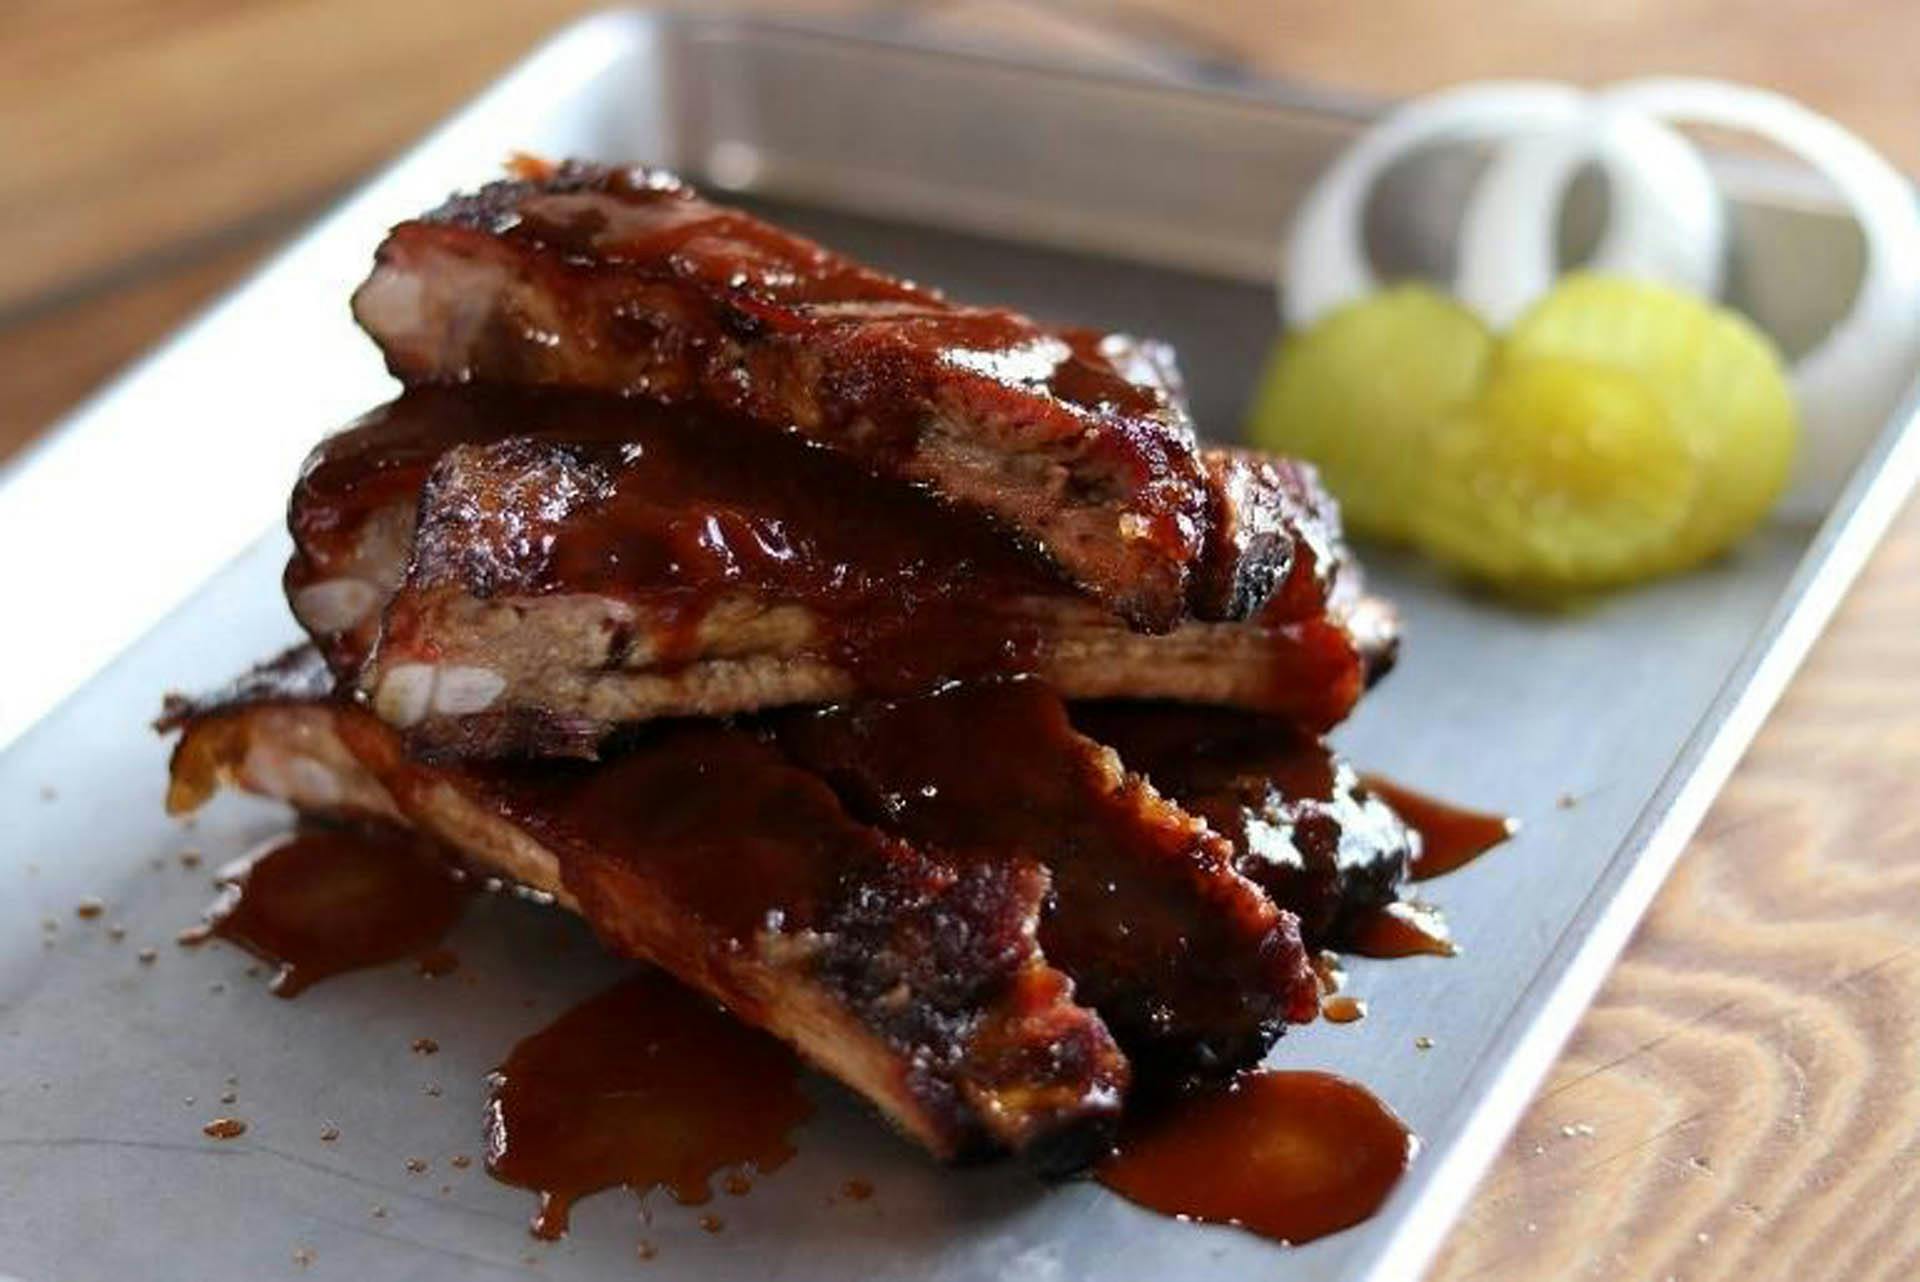 Warm Up with Dickey’s Barbecue Pit Slow Smoked Barbecue